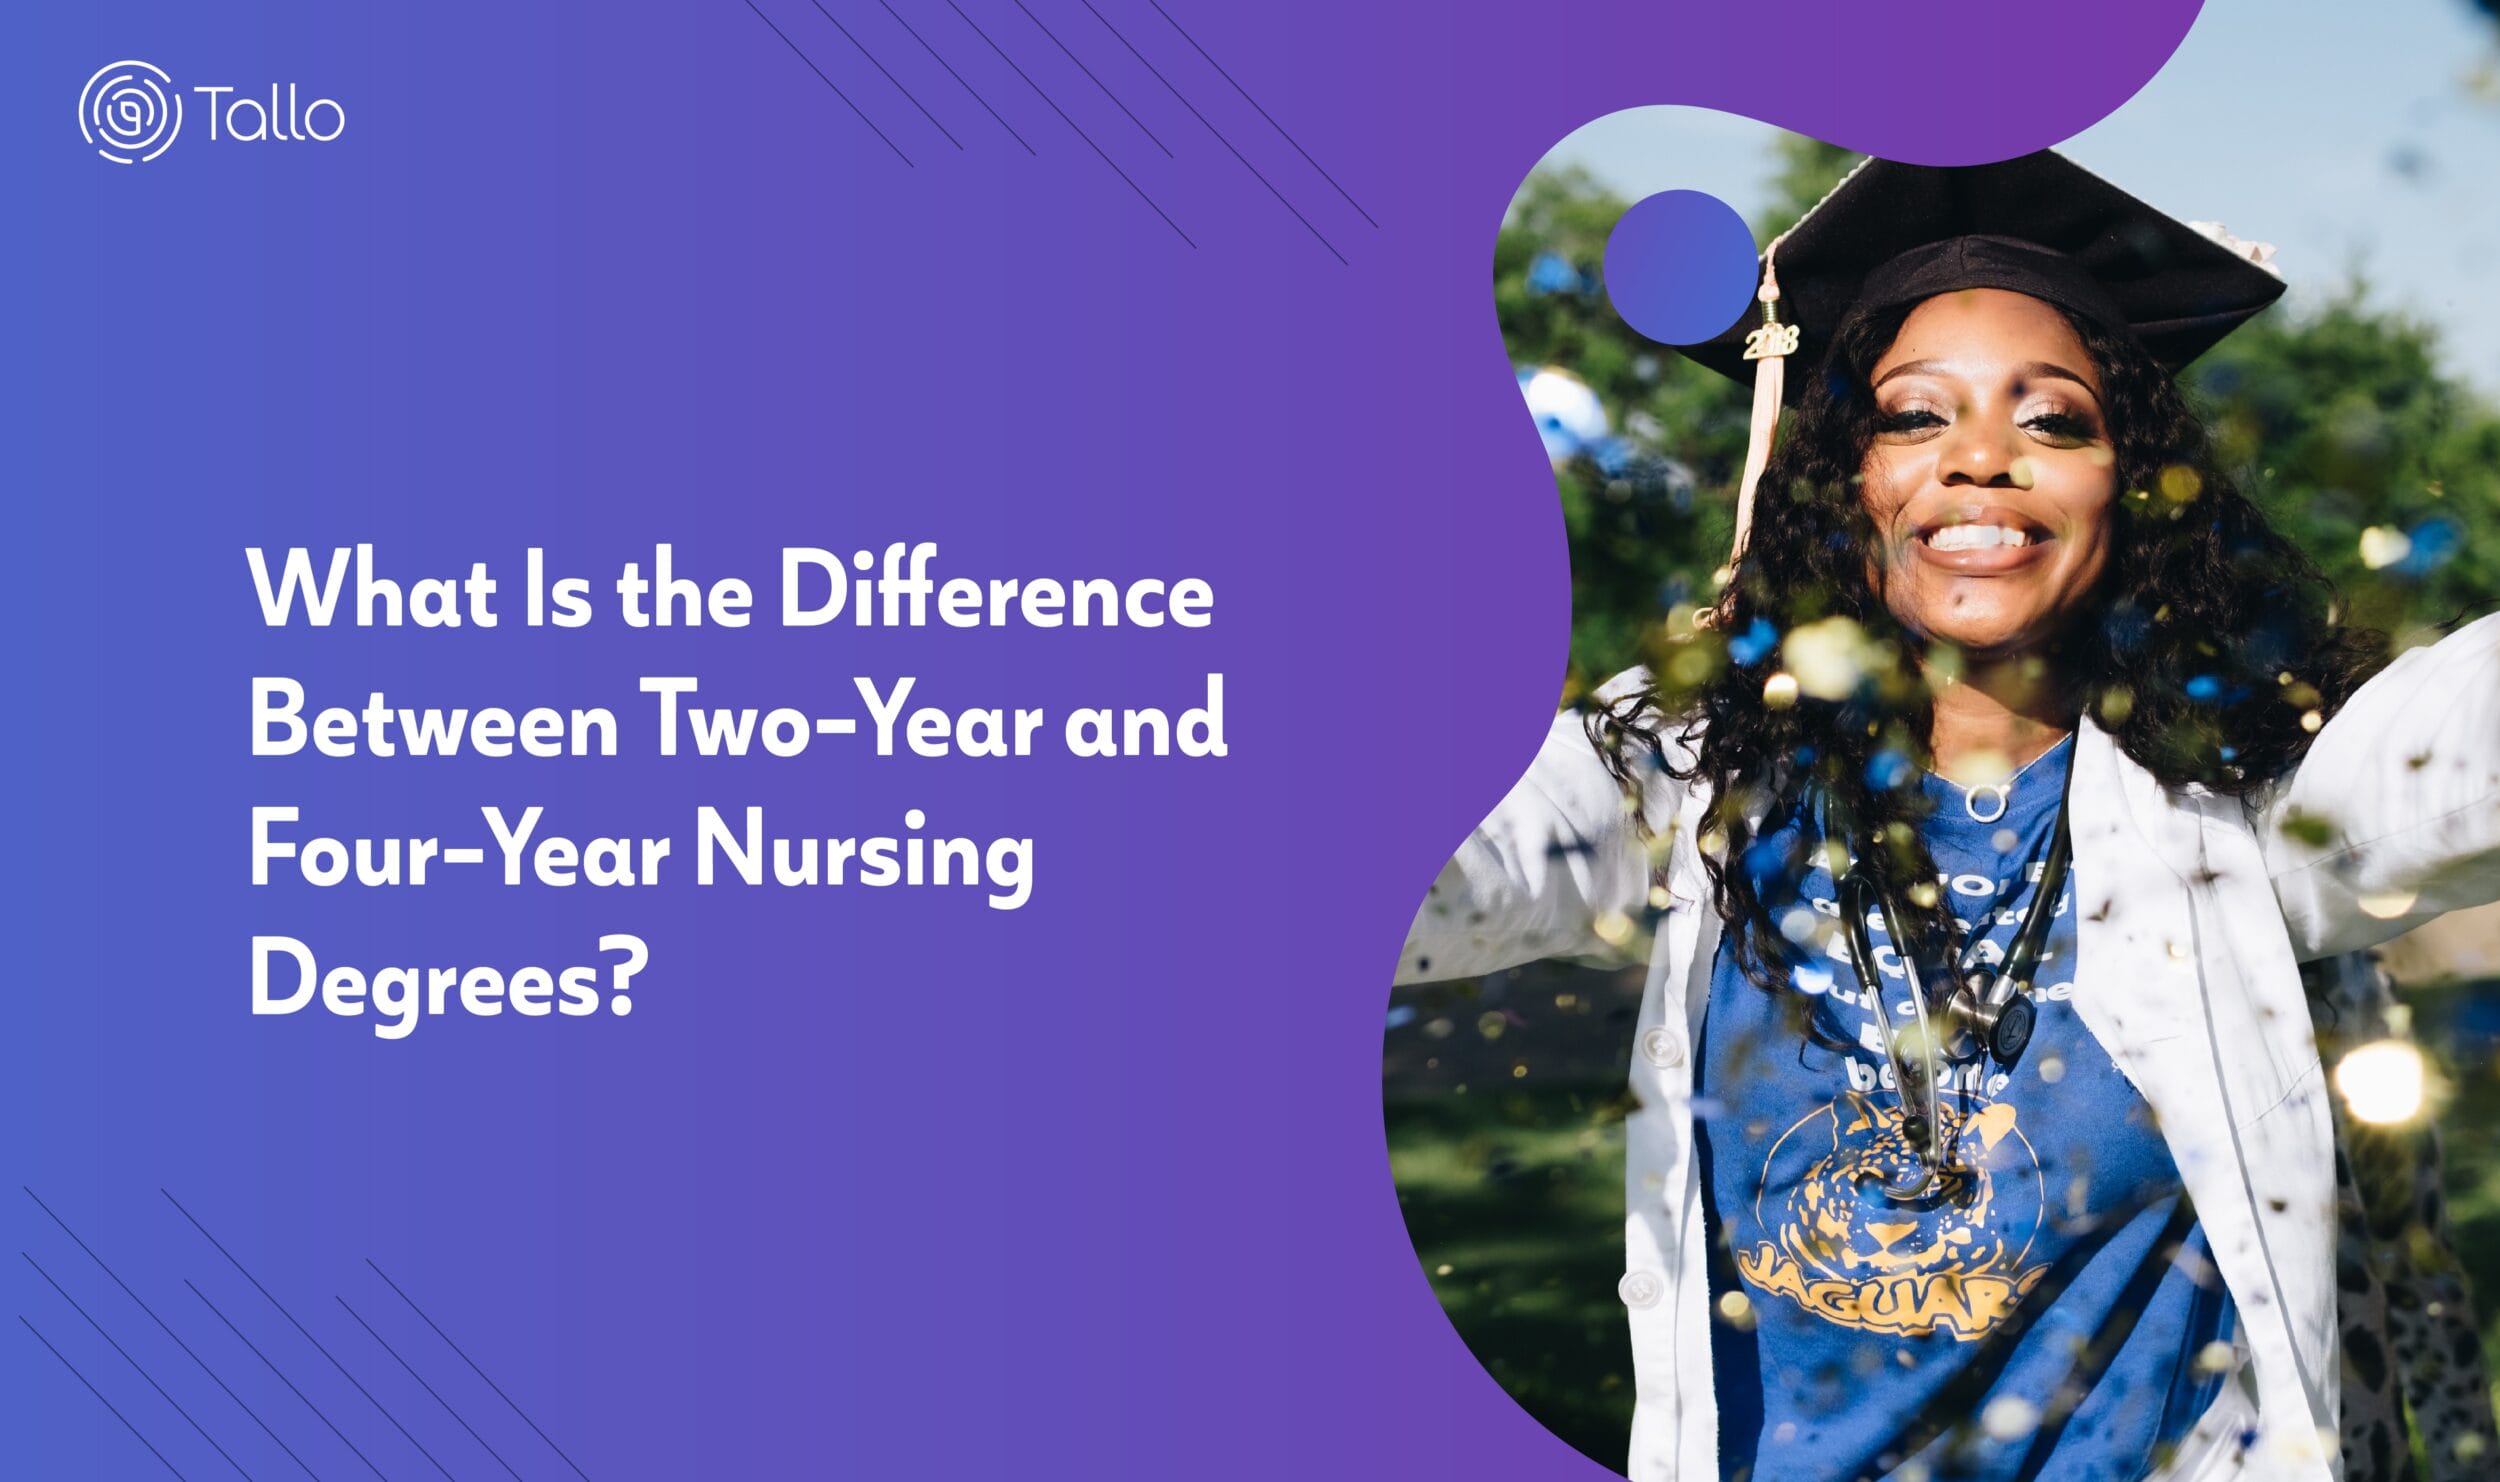 What Is the Difference Between Two-Year and Four-Year Nursing Degrees